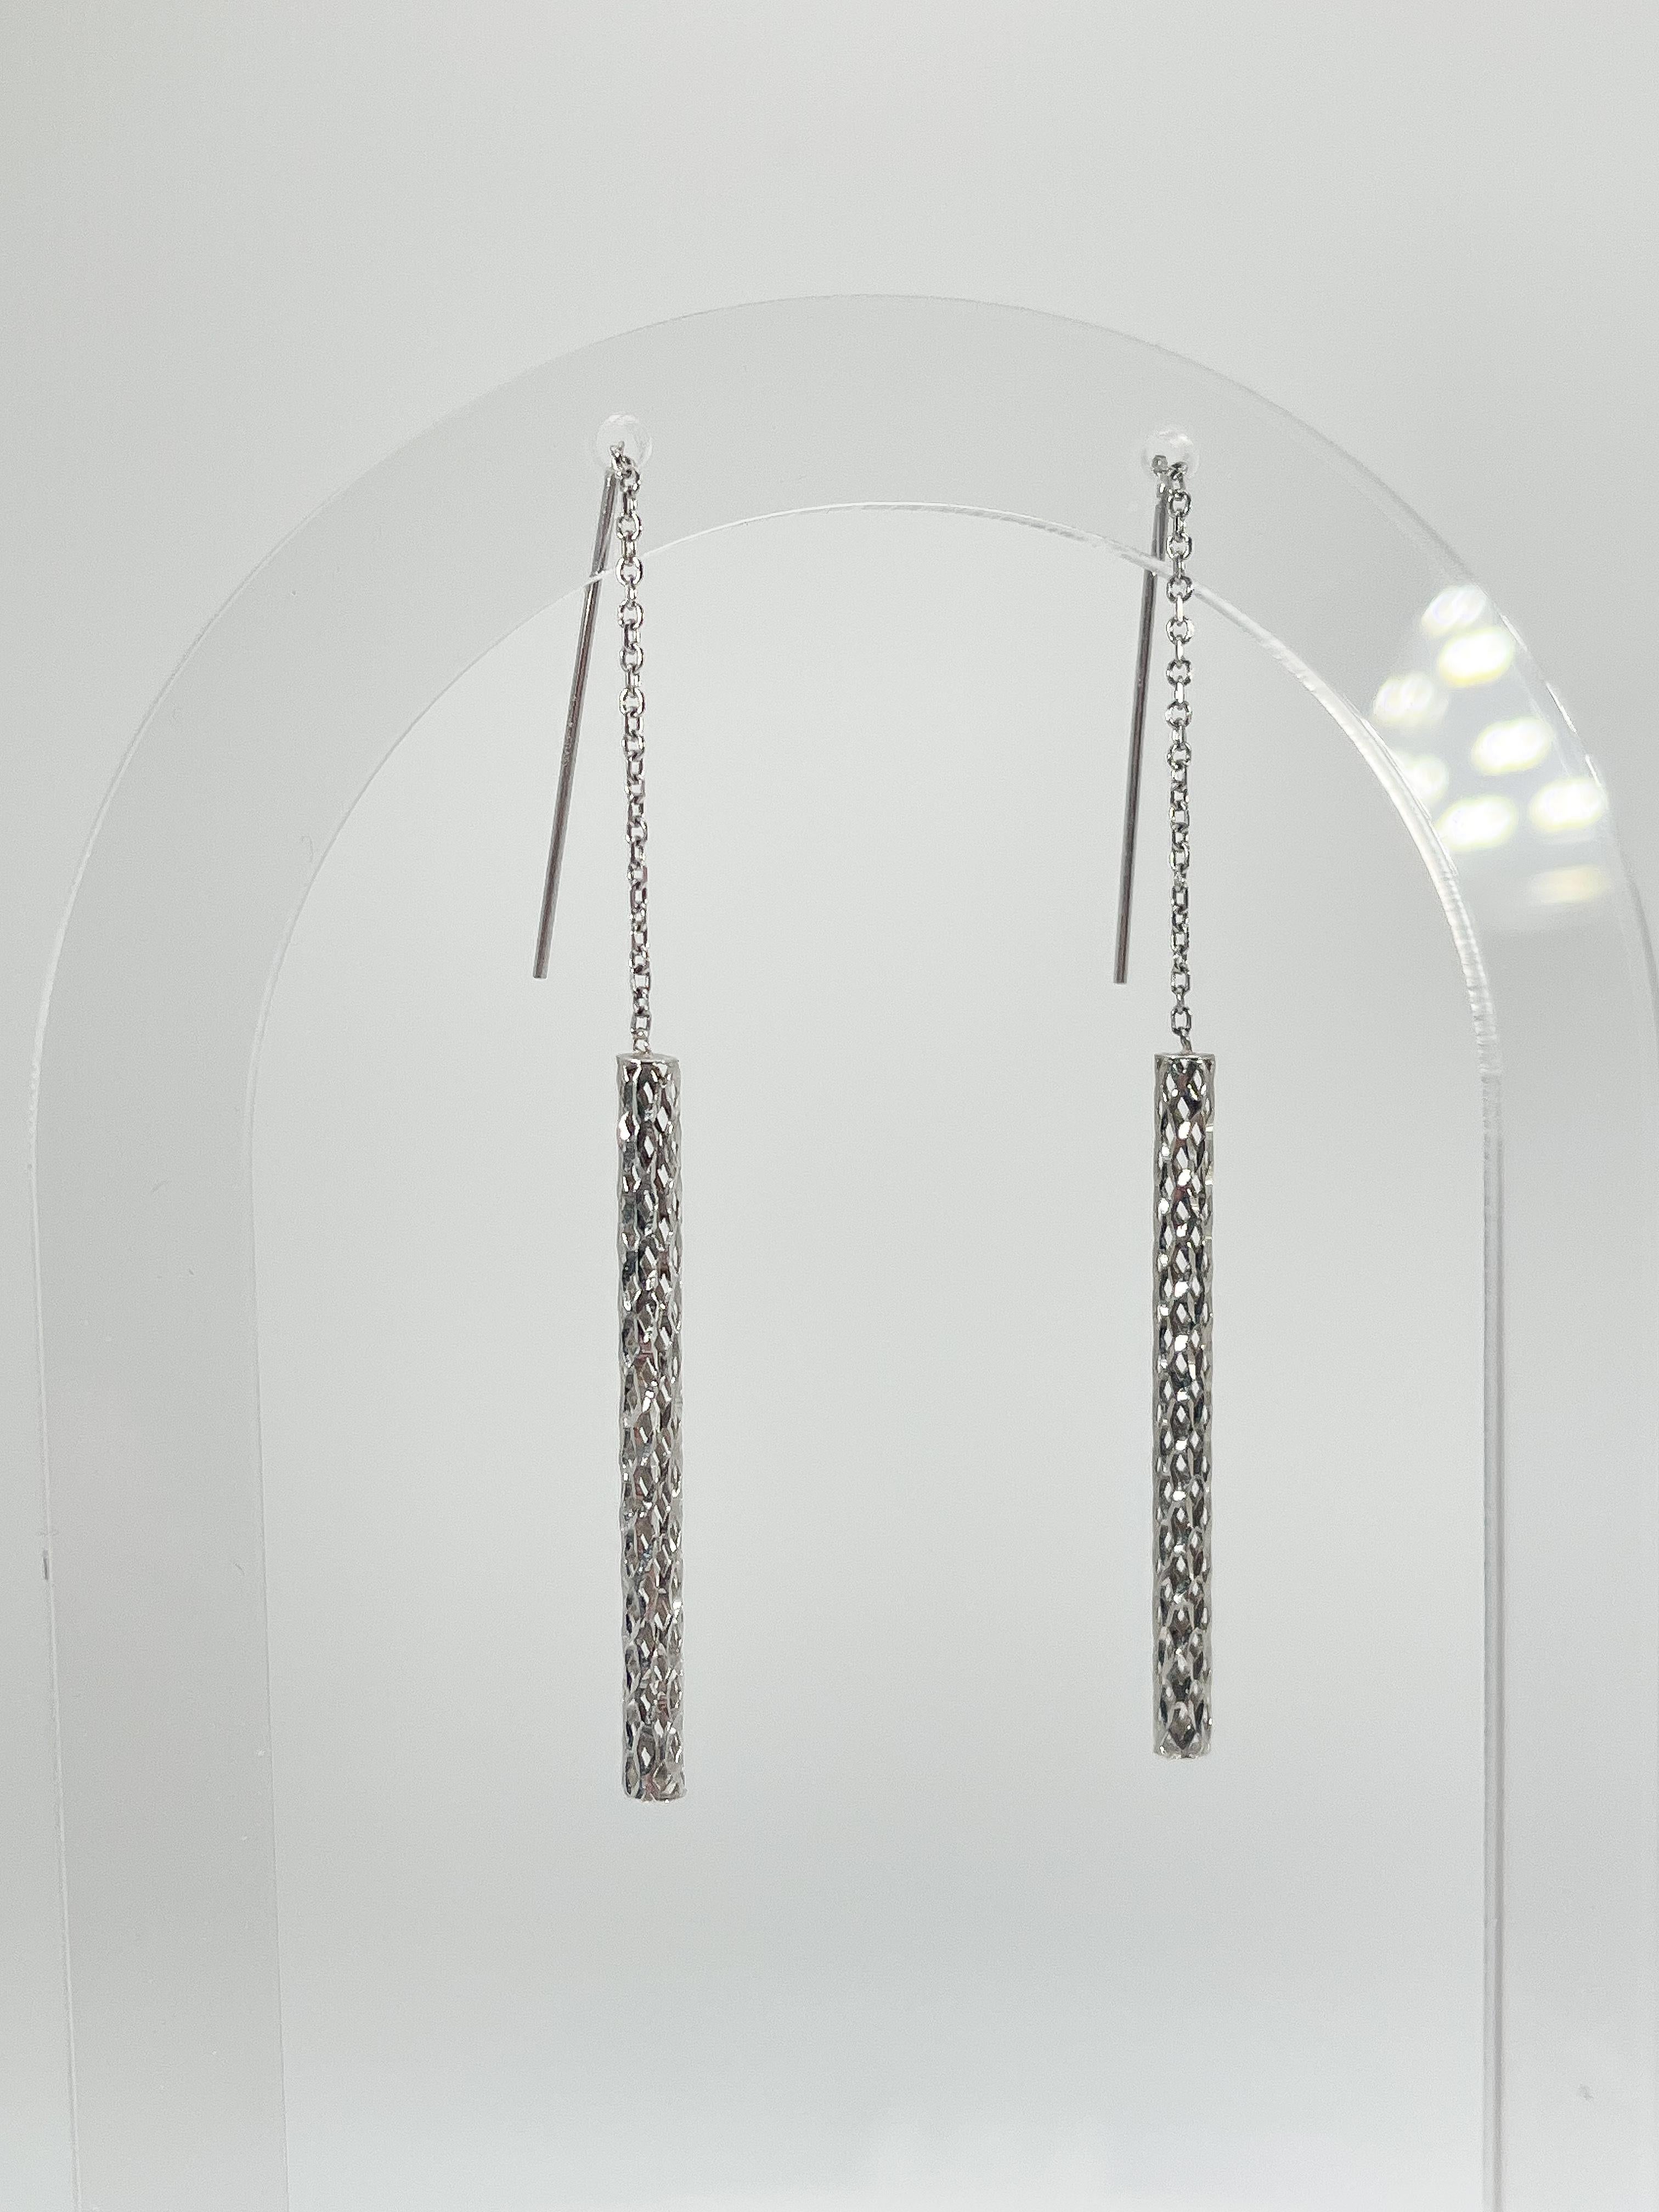 14k white gold fancy tube threader earrings. The length of the earrings can be slightly adjusted. Tubes measure 35.3 x 2.7 mm, and the total weight is 1.44 grams.